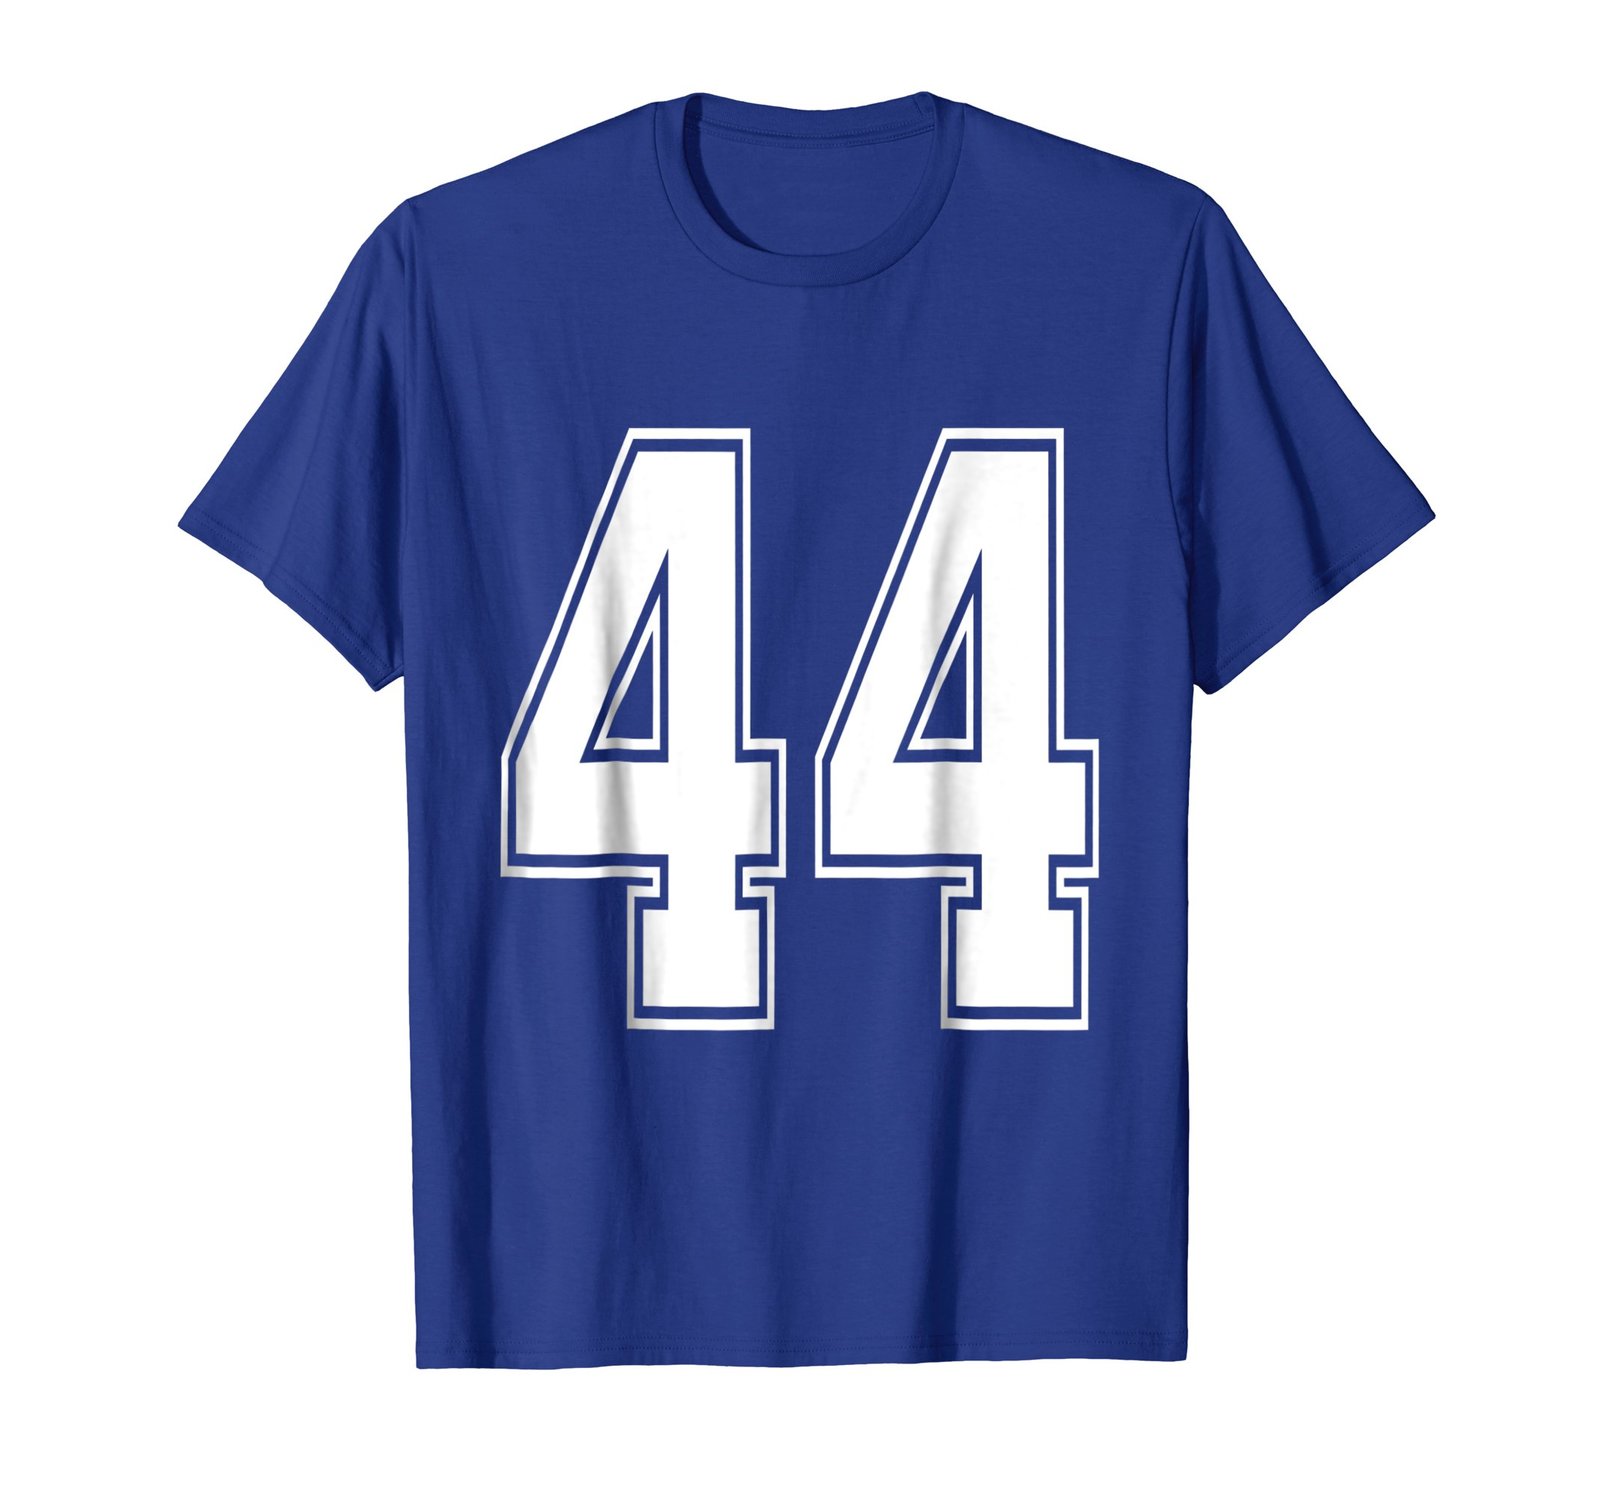 44 Number 44 Sports Jersey T-shirt My Favorite Player 44 - T-Shirts ...